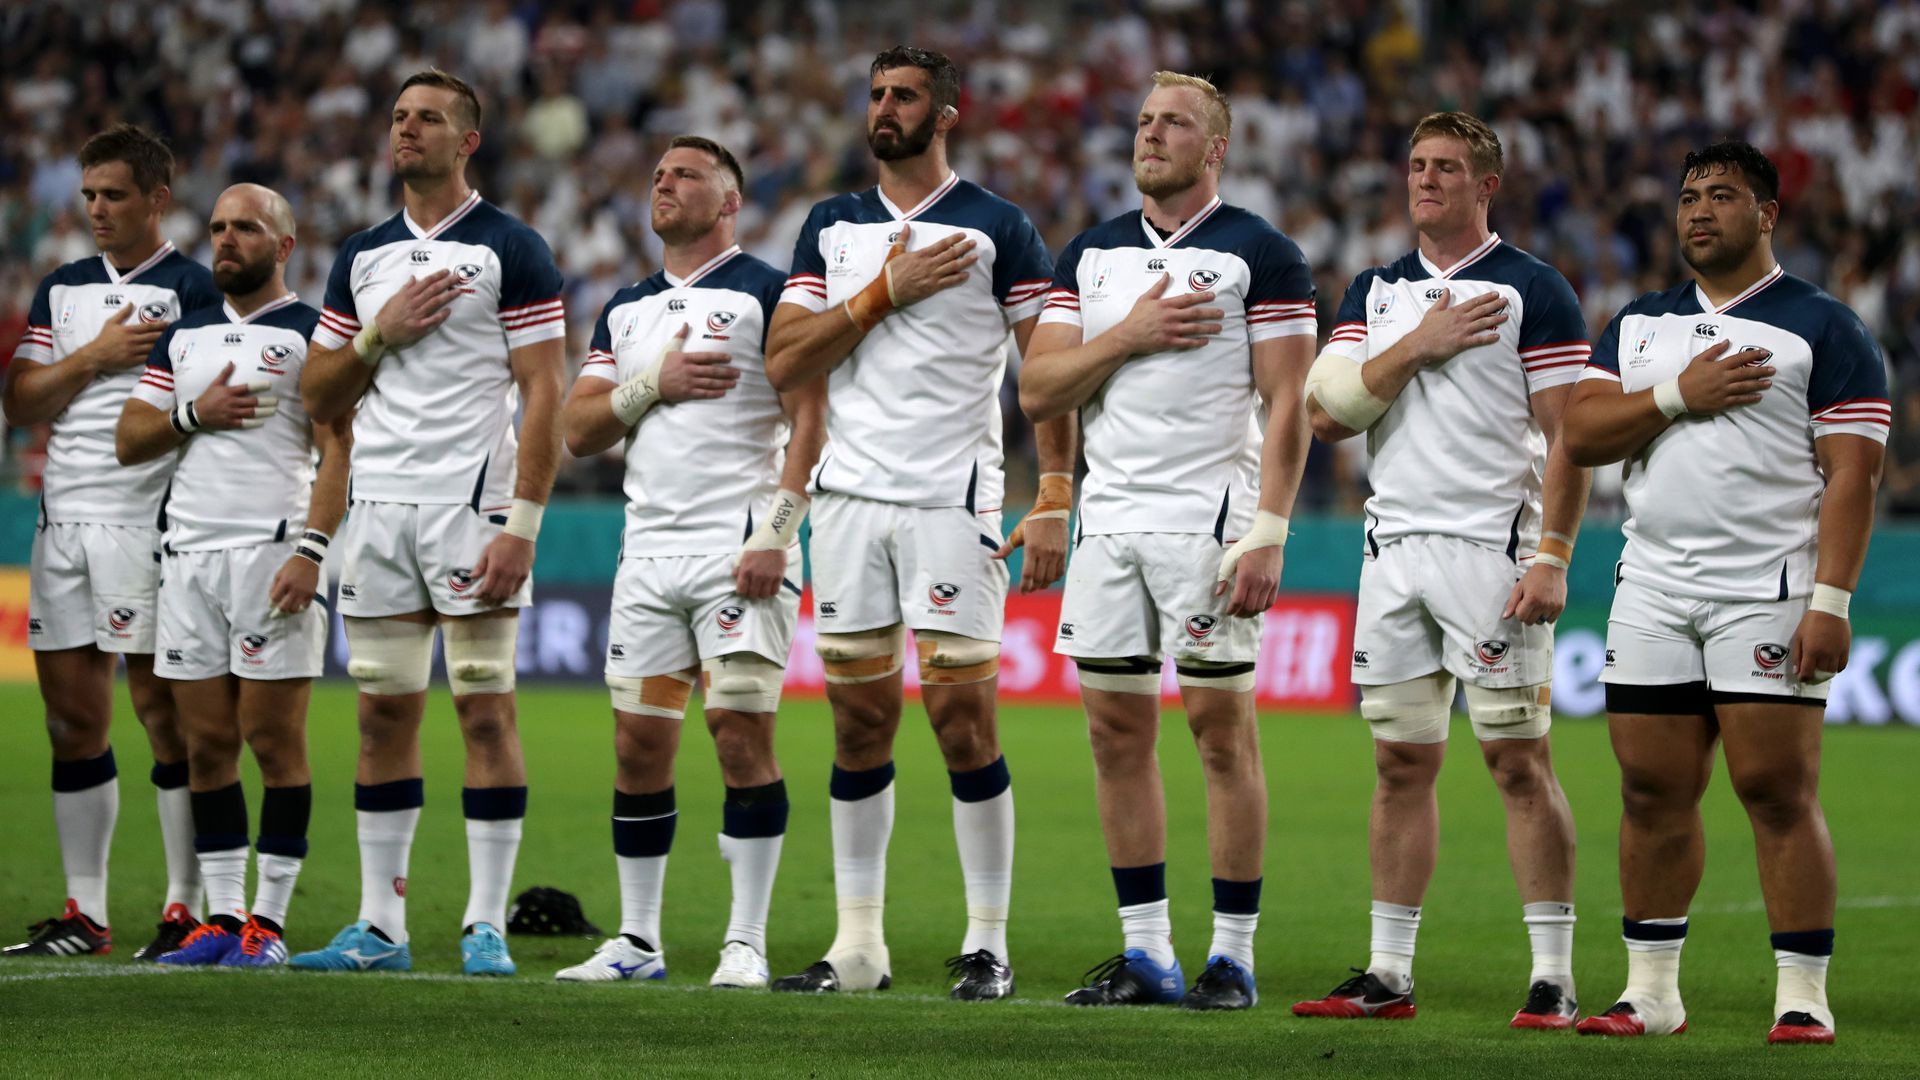 The U.S. rugby team.